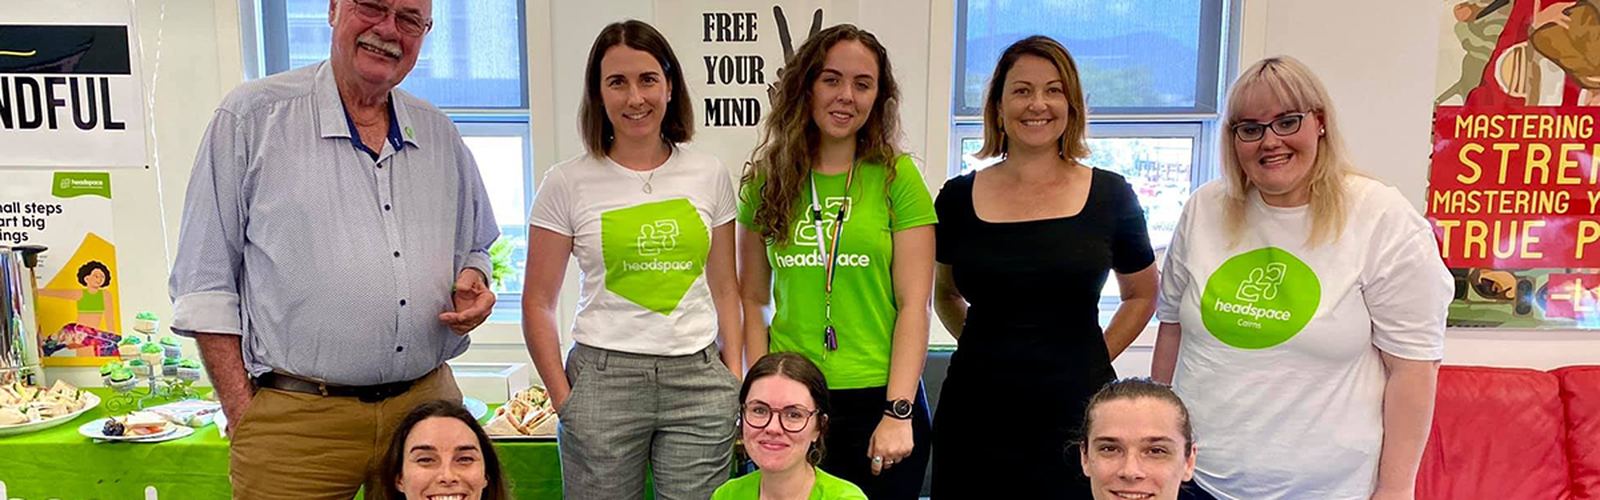 Cairns team celebrates headspace day